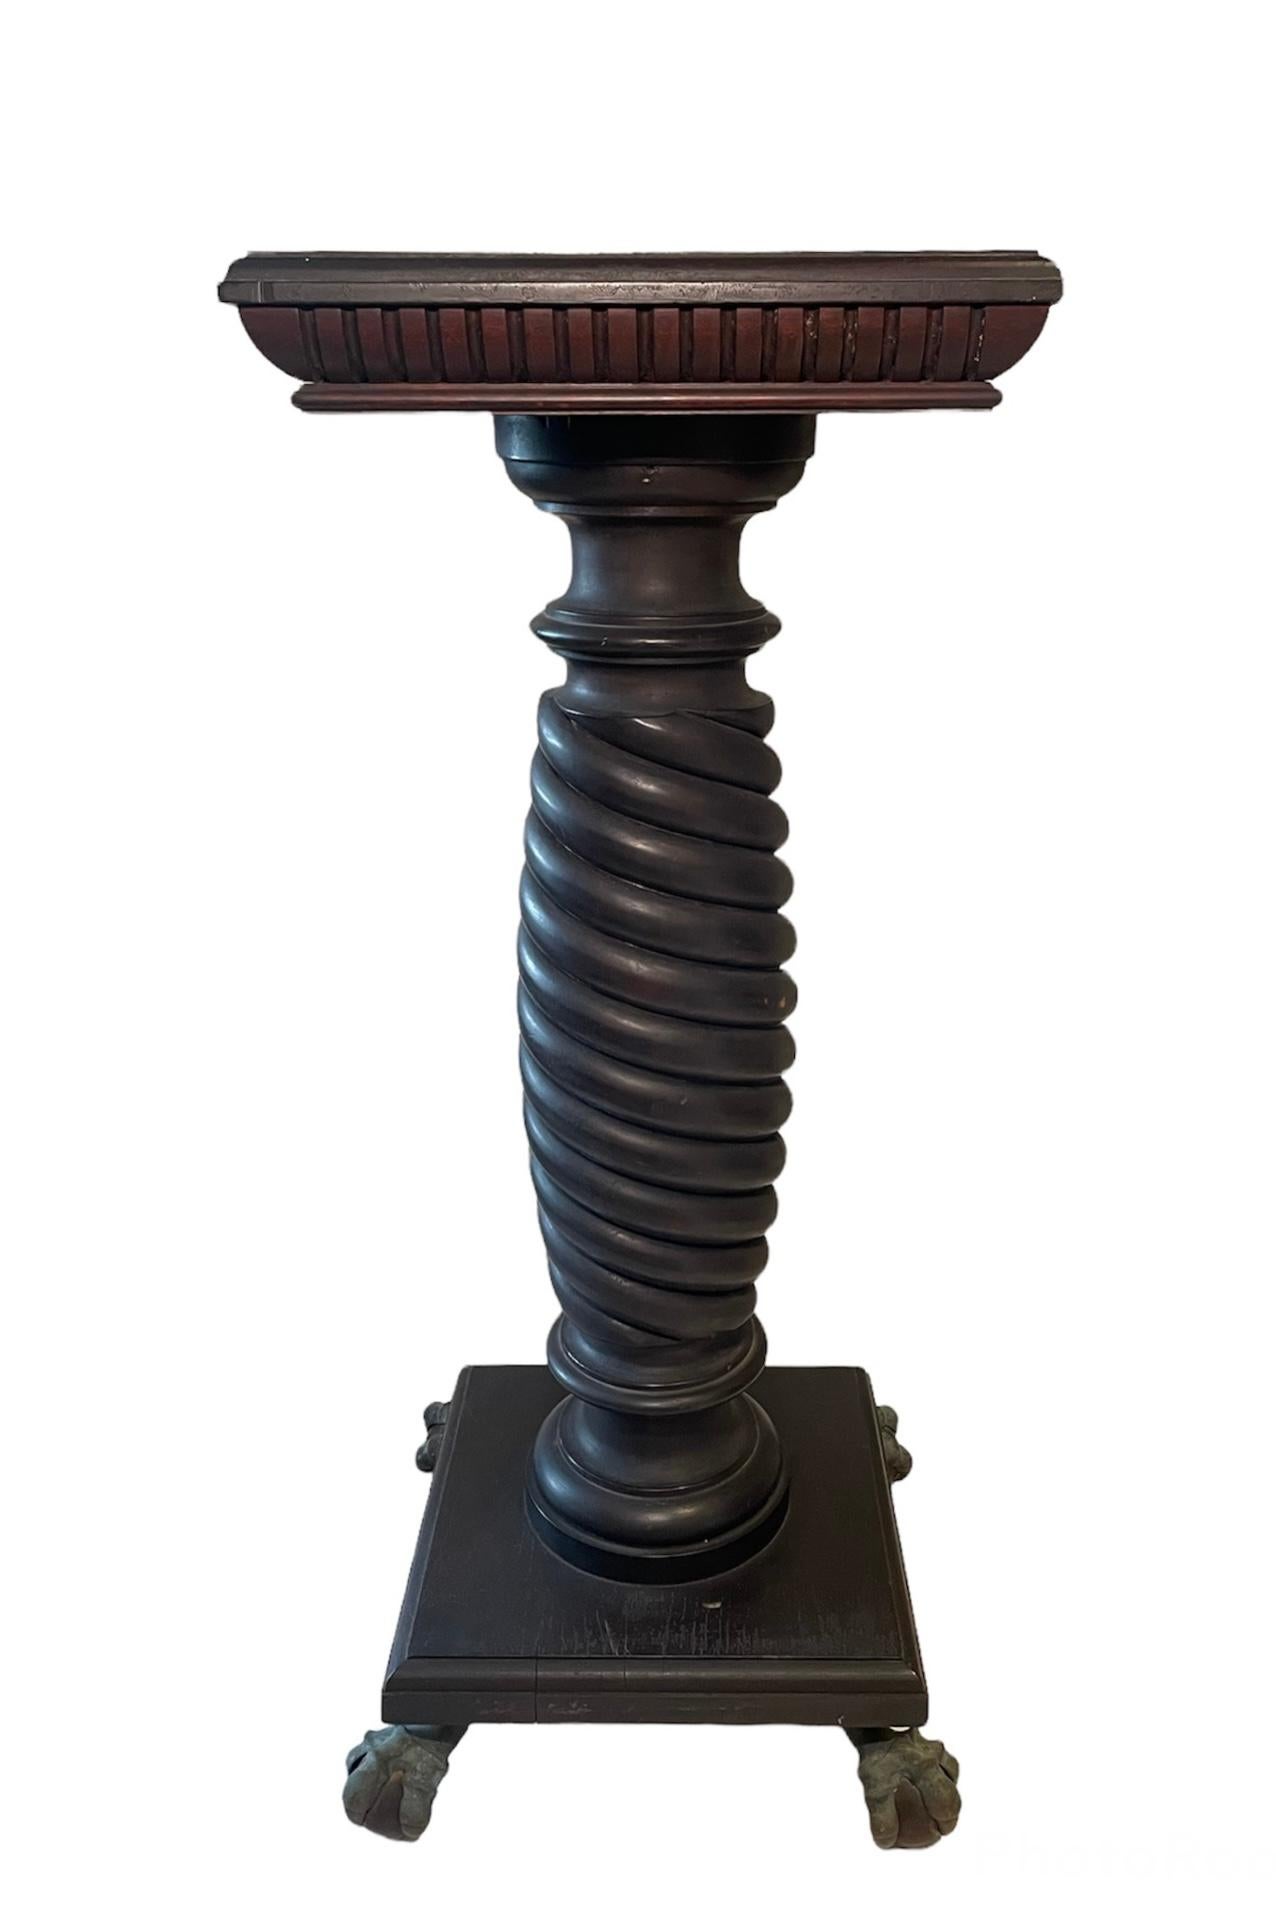 This is a very tall and heavy spiral carved dark solid wood column. It depicts a square top adorned with fluted side borders. This is followed by a spiral carved wide column that ends with a square wood base with four bronze bird talons and wood